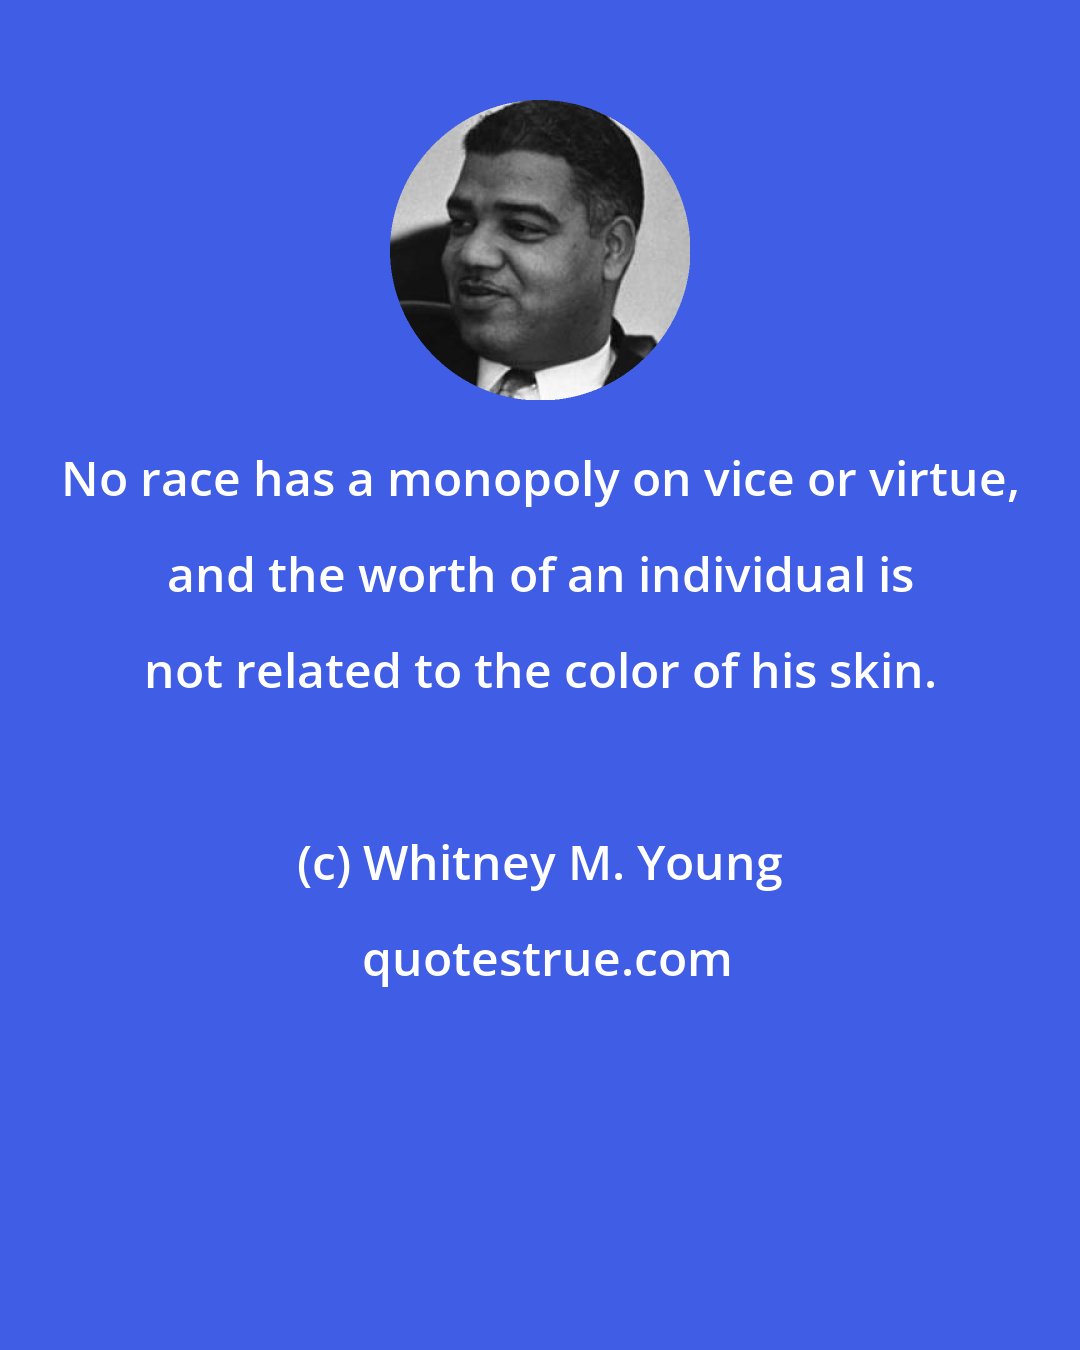 Whitney M. Young: No race has a monopoly on vice or virtue, and the worth of an individual is not related to the color of his skin.